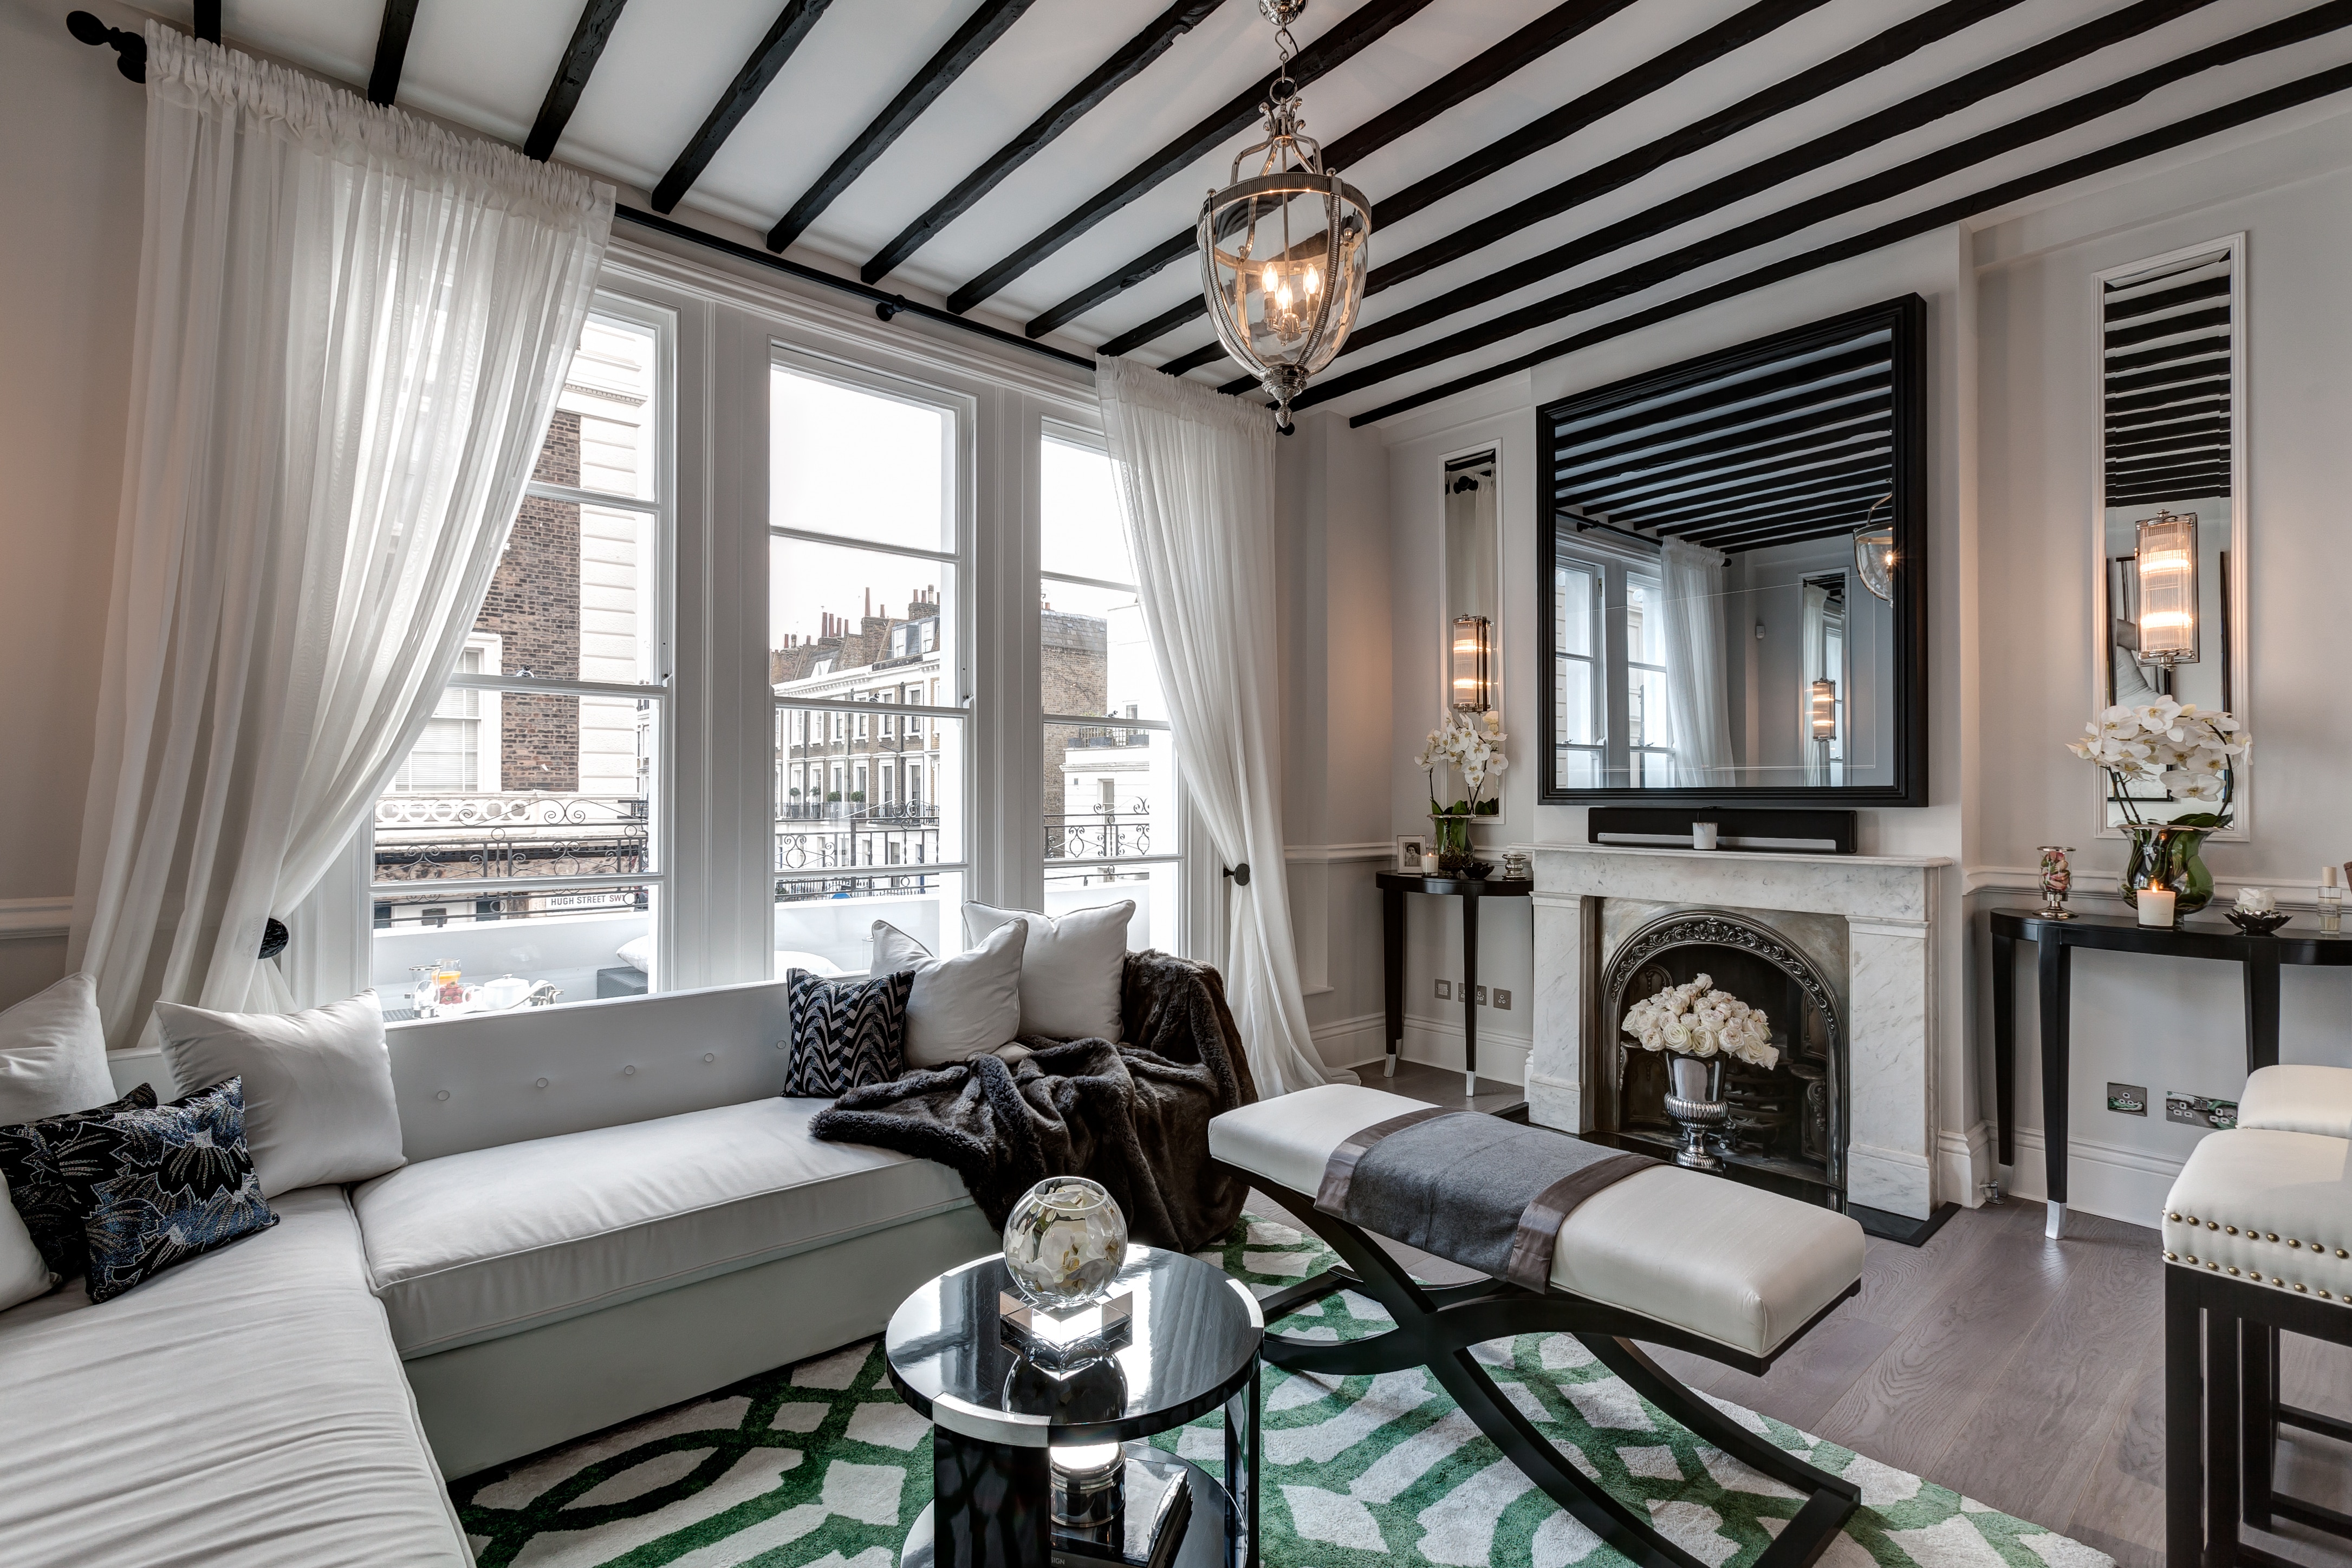 Property Image 1 - Deluxe Victoria House with Views over the historic Pimlico Conservation Area